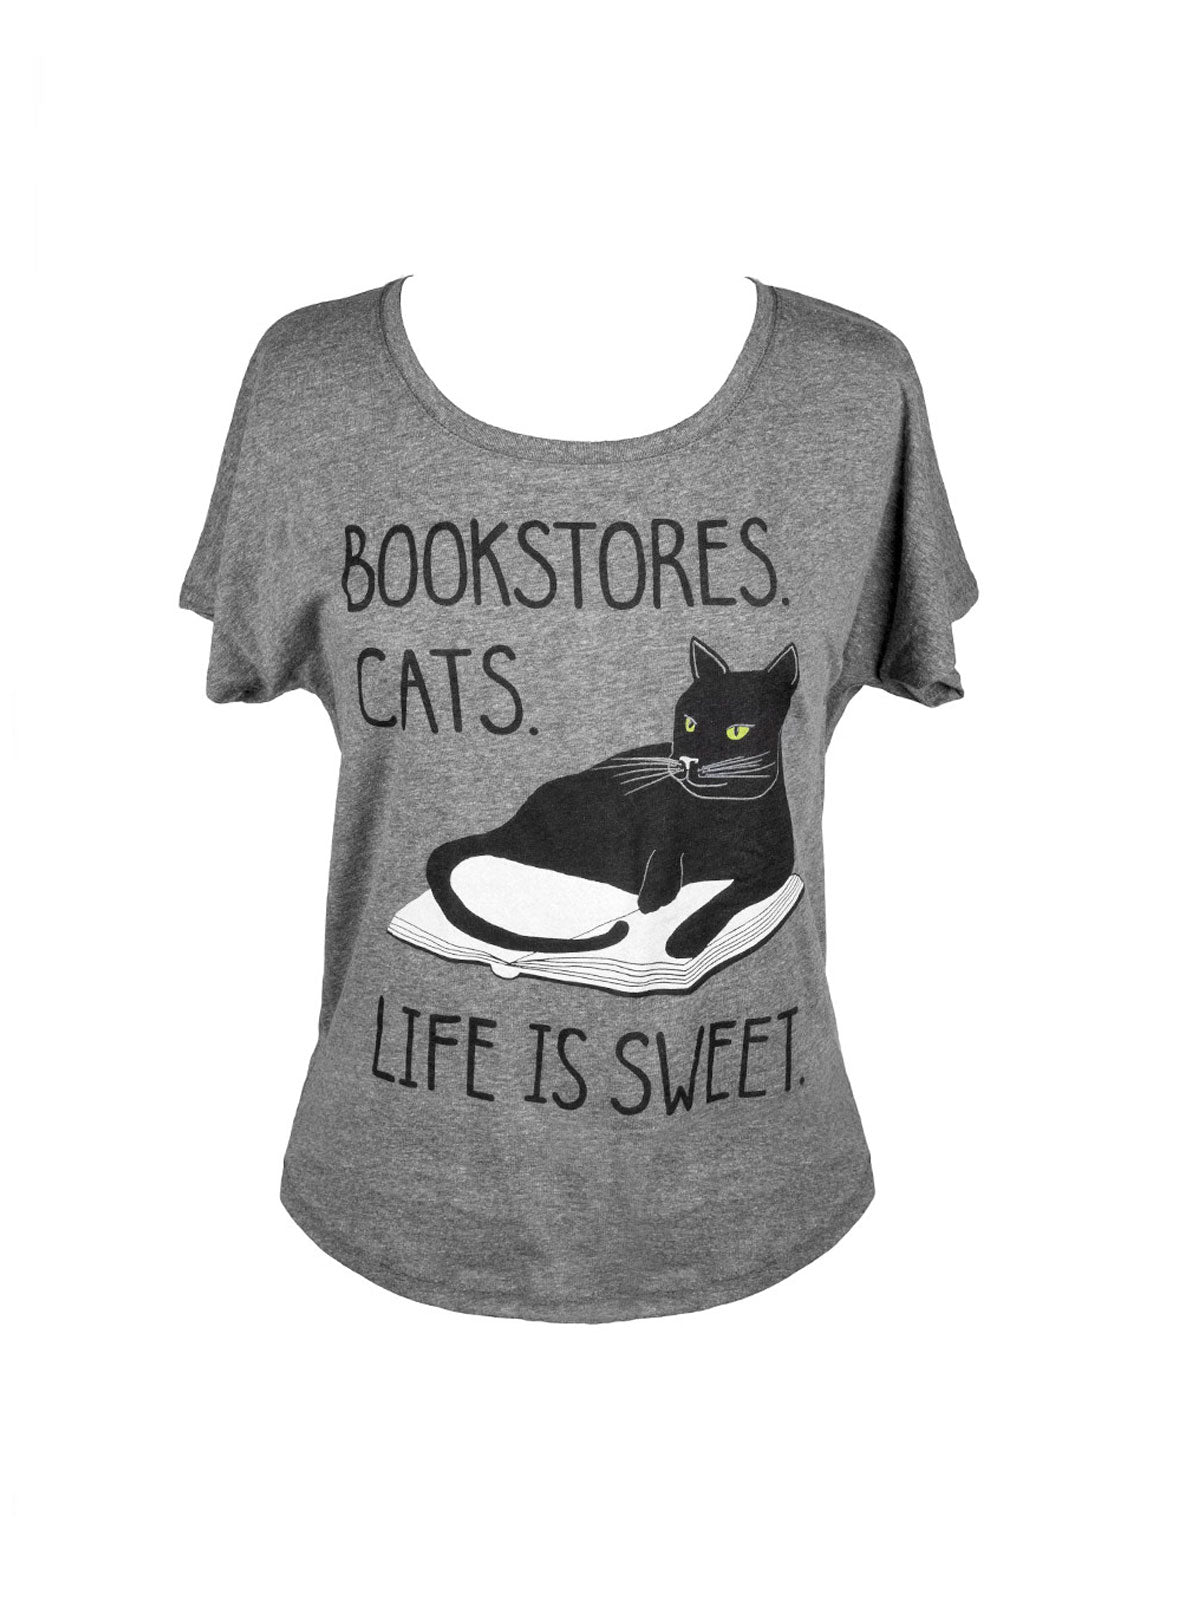 Bookstores. Cats. Life is Sweet.